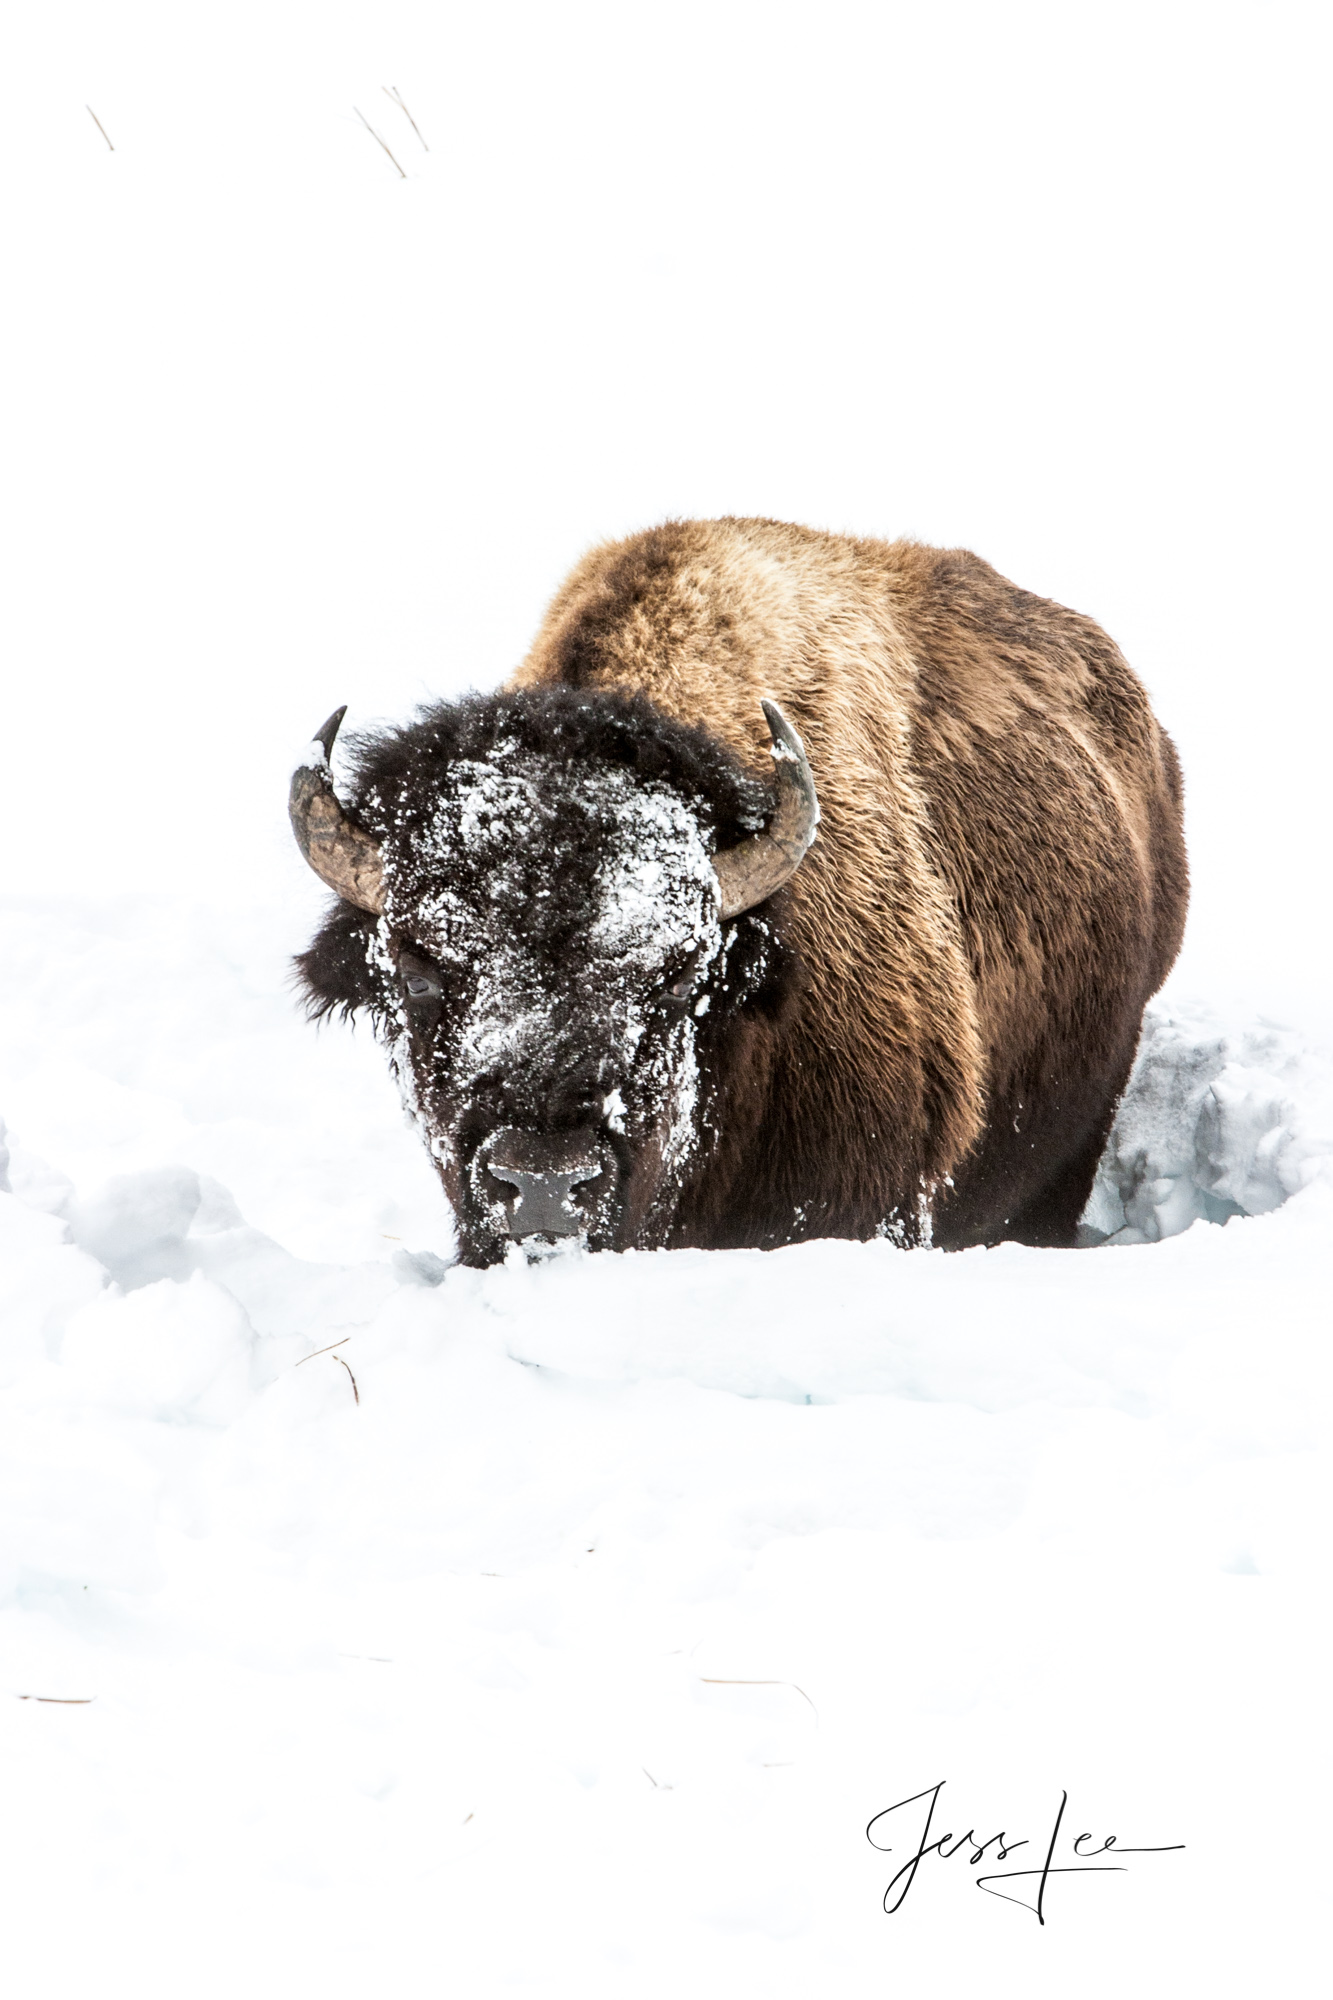 Yellowstone Bison or American Buffalo.. A Limited Edition of 800 Prints. These Frozen Faced Bison fine art wildlife photographs...